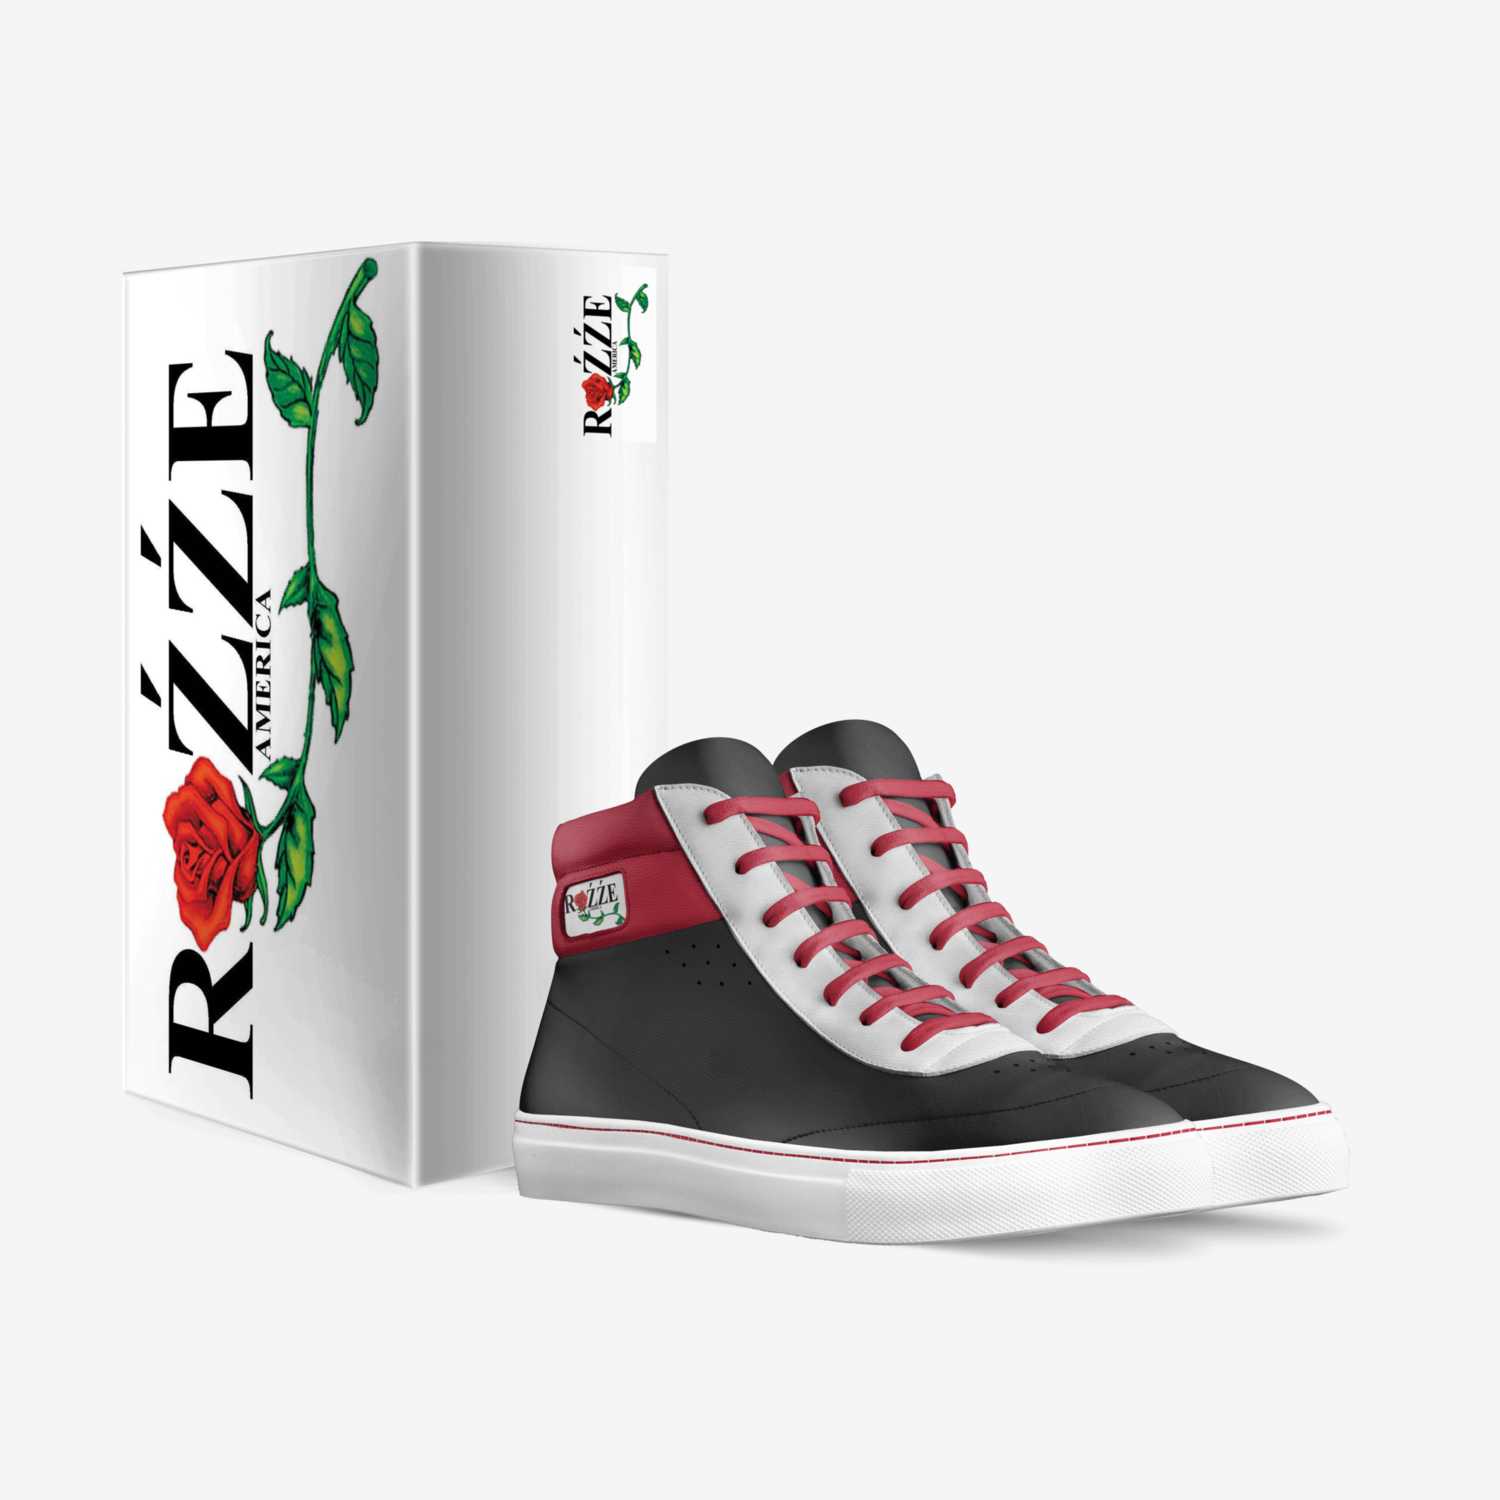 ROZZE custom made in Italy shoes by Shae Hoskins | Box view